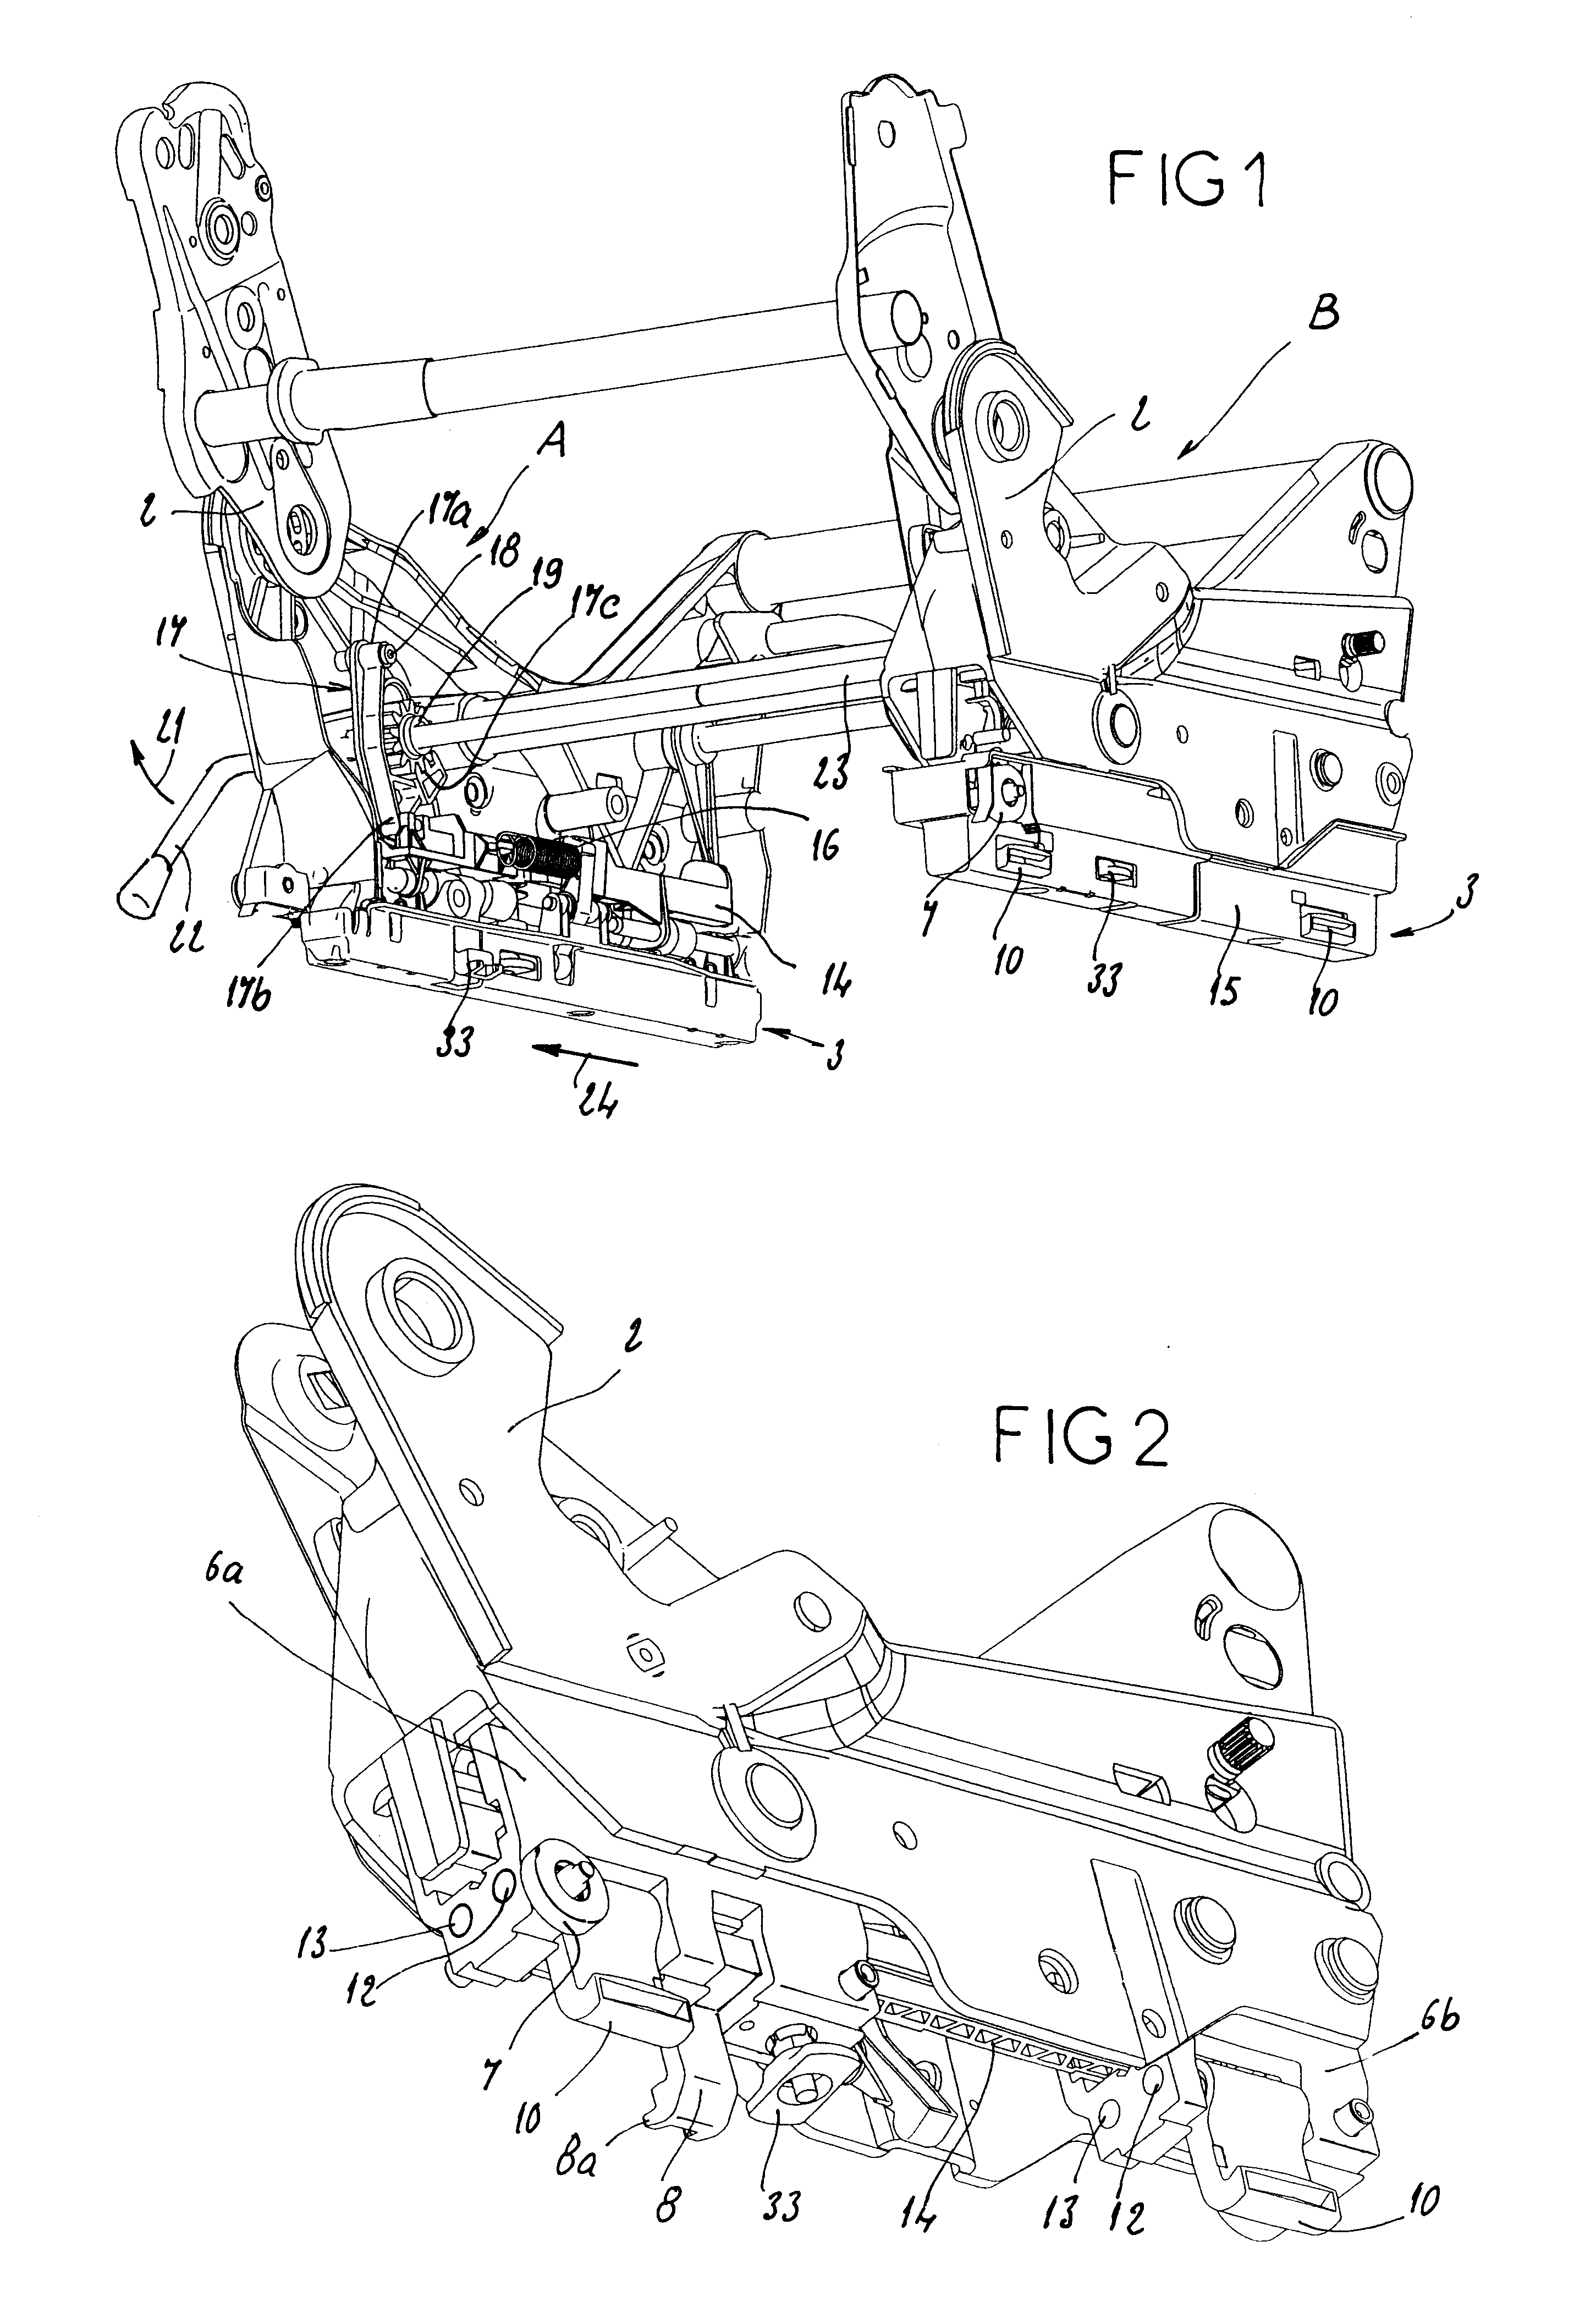 Device for the vertical and automatic wedging of a vehicle seat